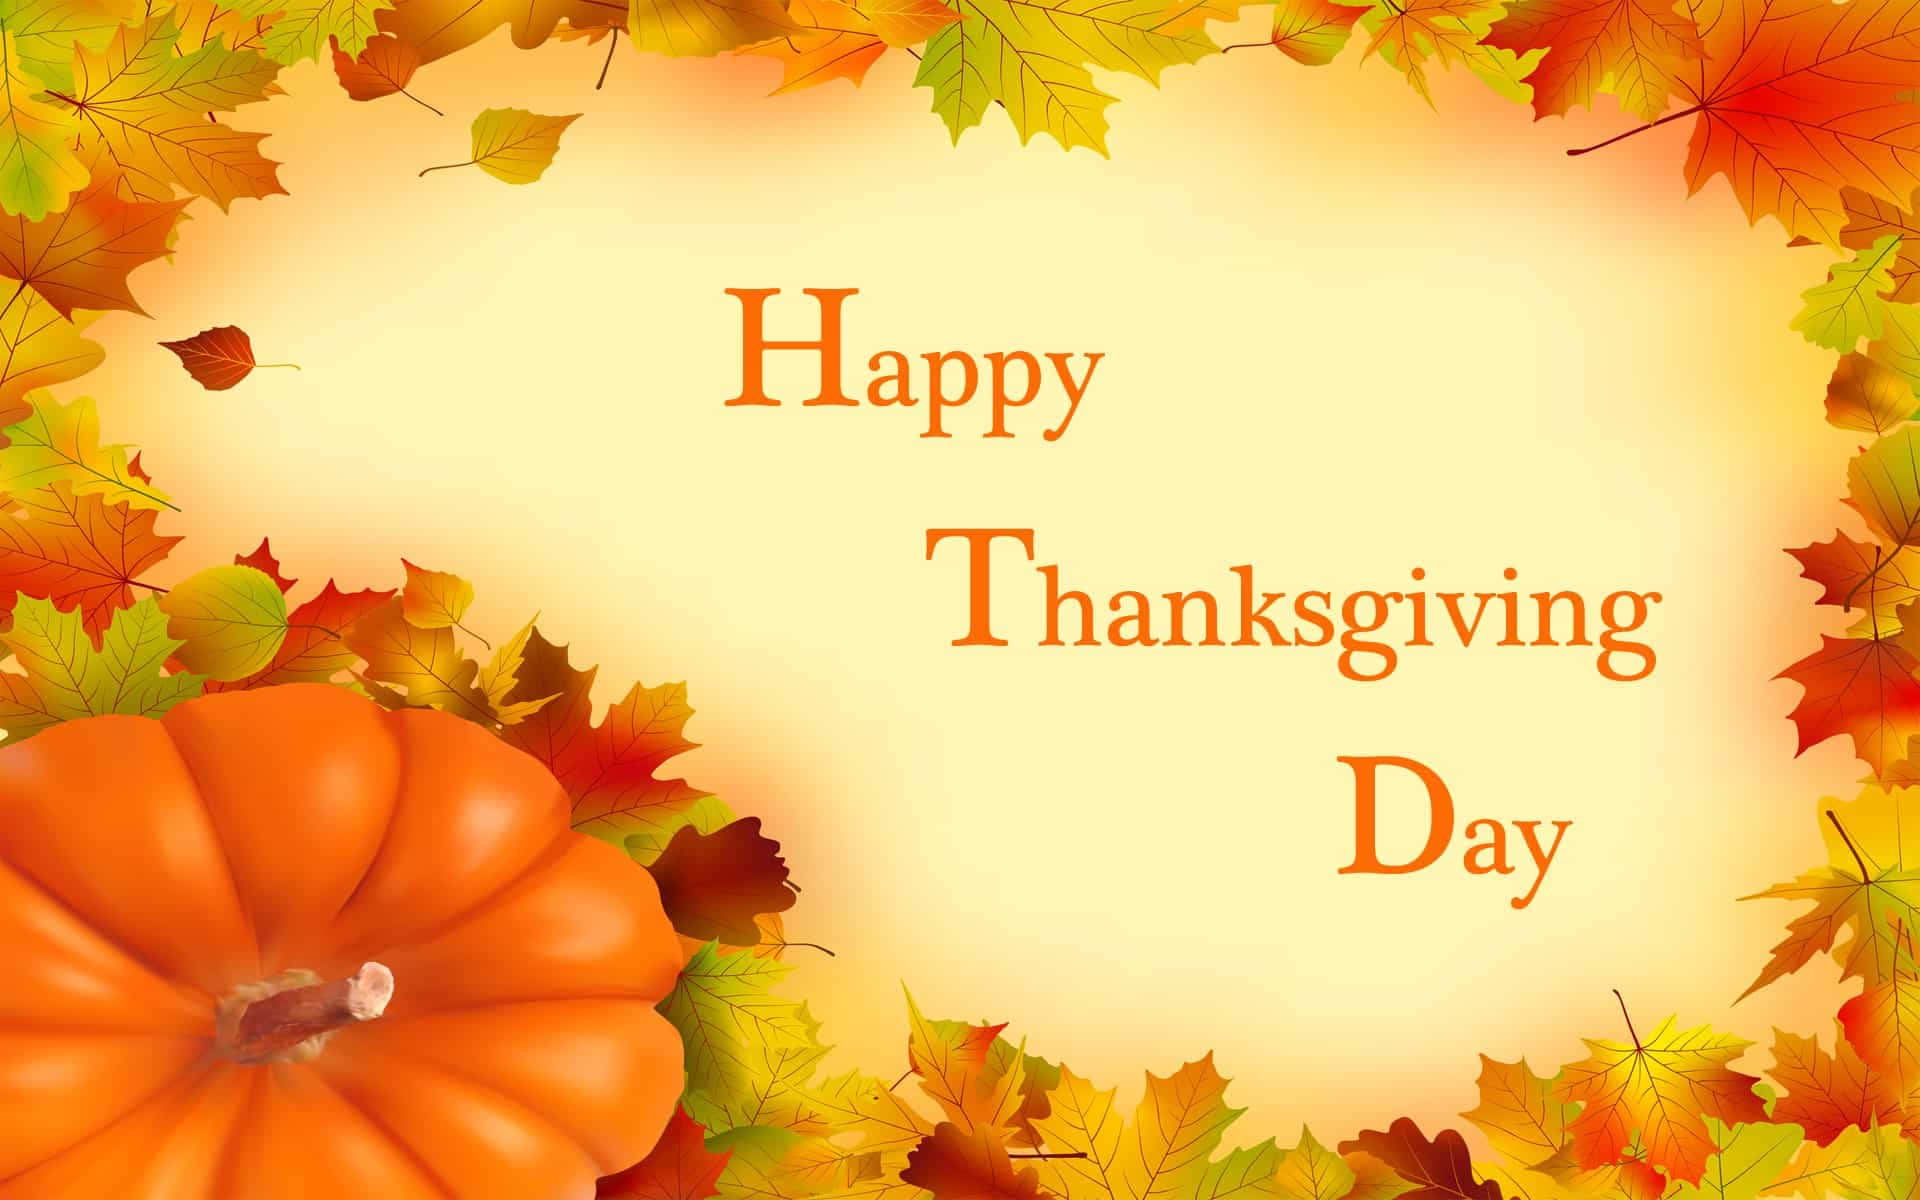 Celebrate The Day Of Giving Thanks With A Feast Of Thanksgiving Food. Background